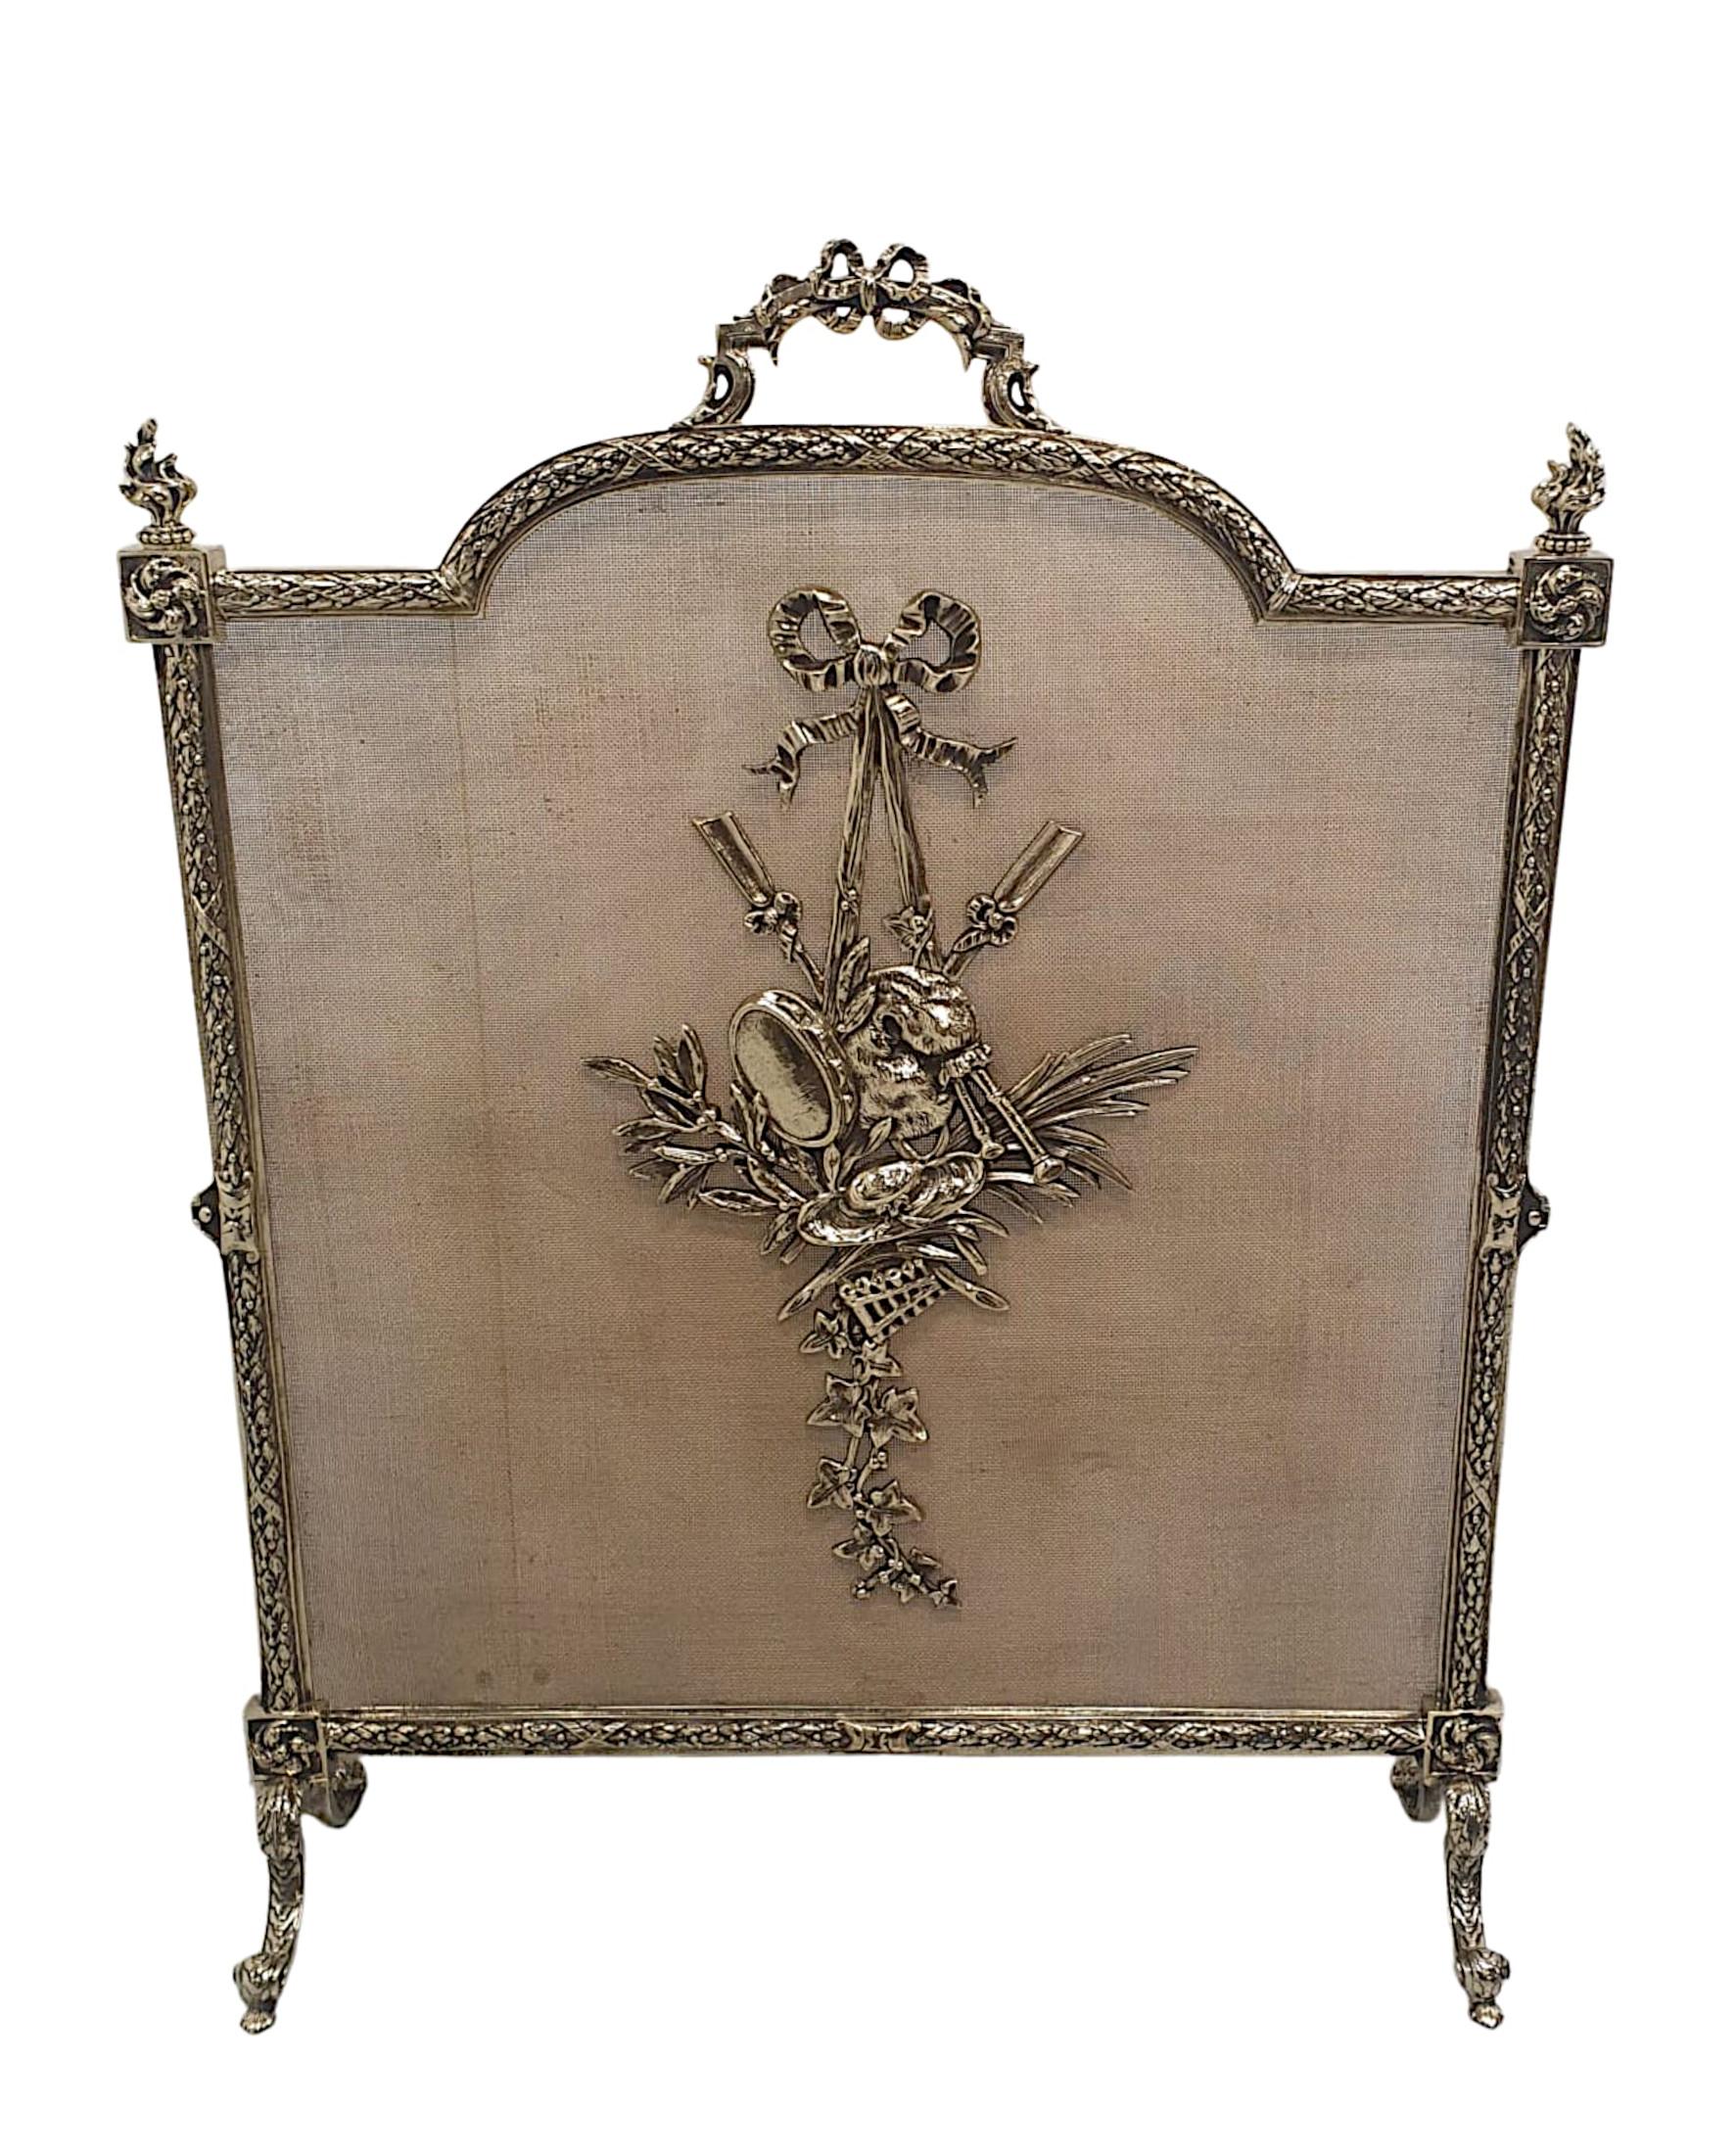  A Stunning 19th Century Fully Restored Brass Fire Screen  For Sale